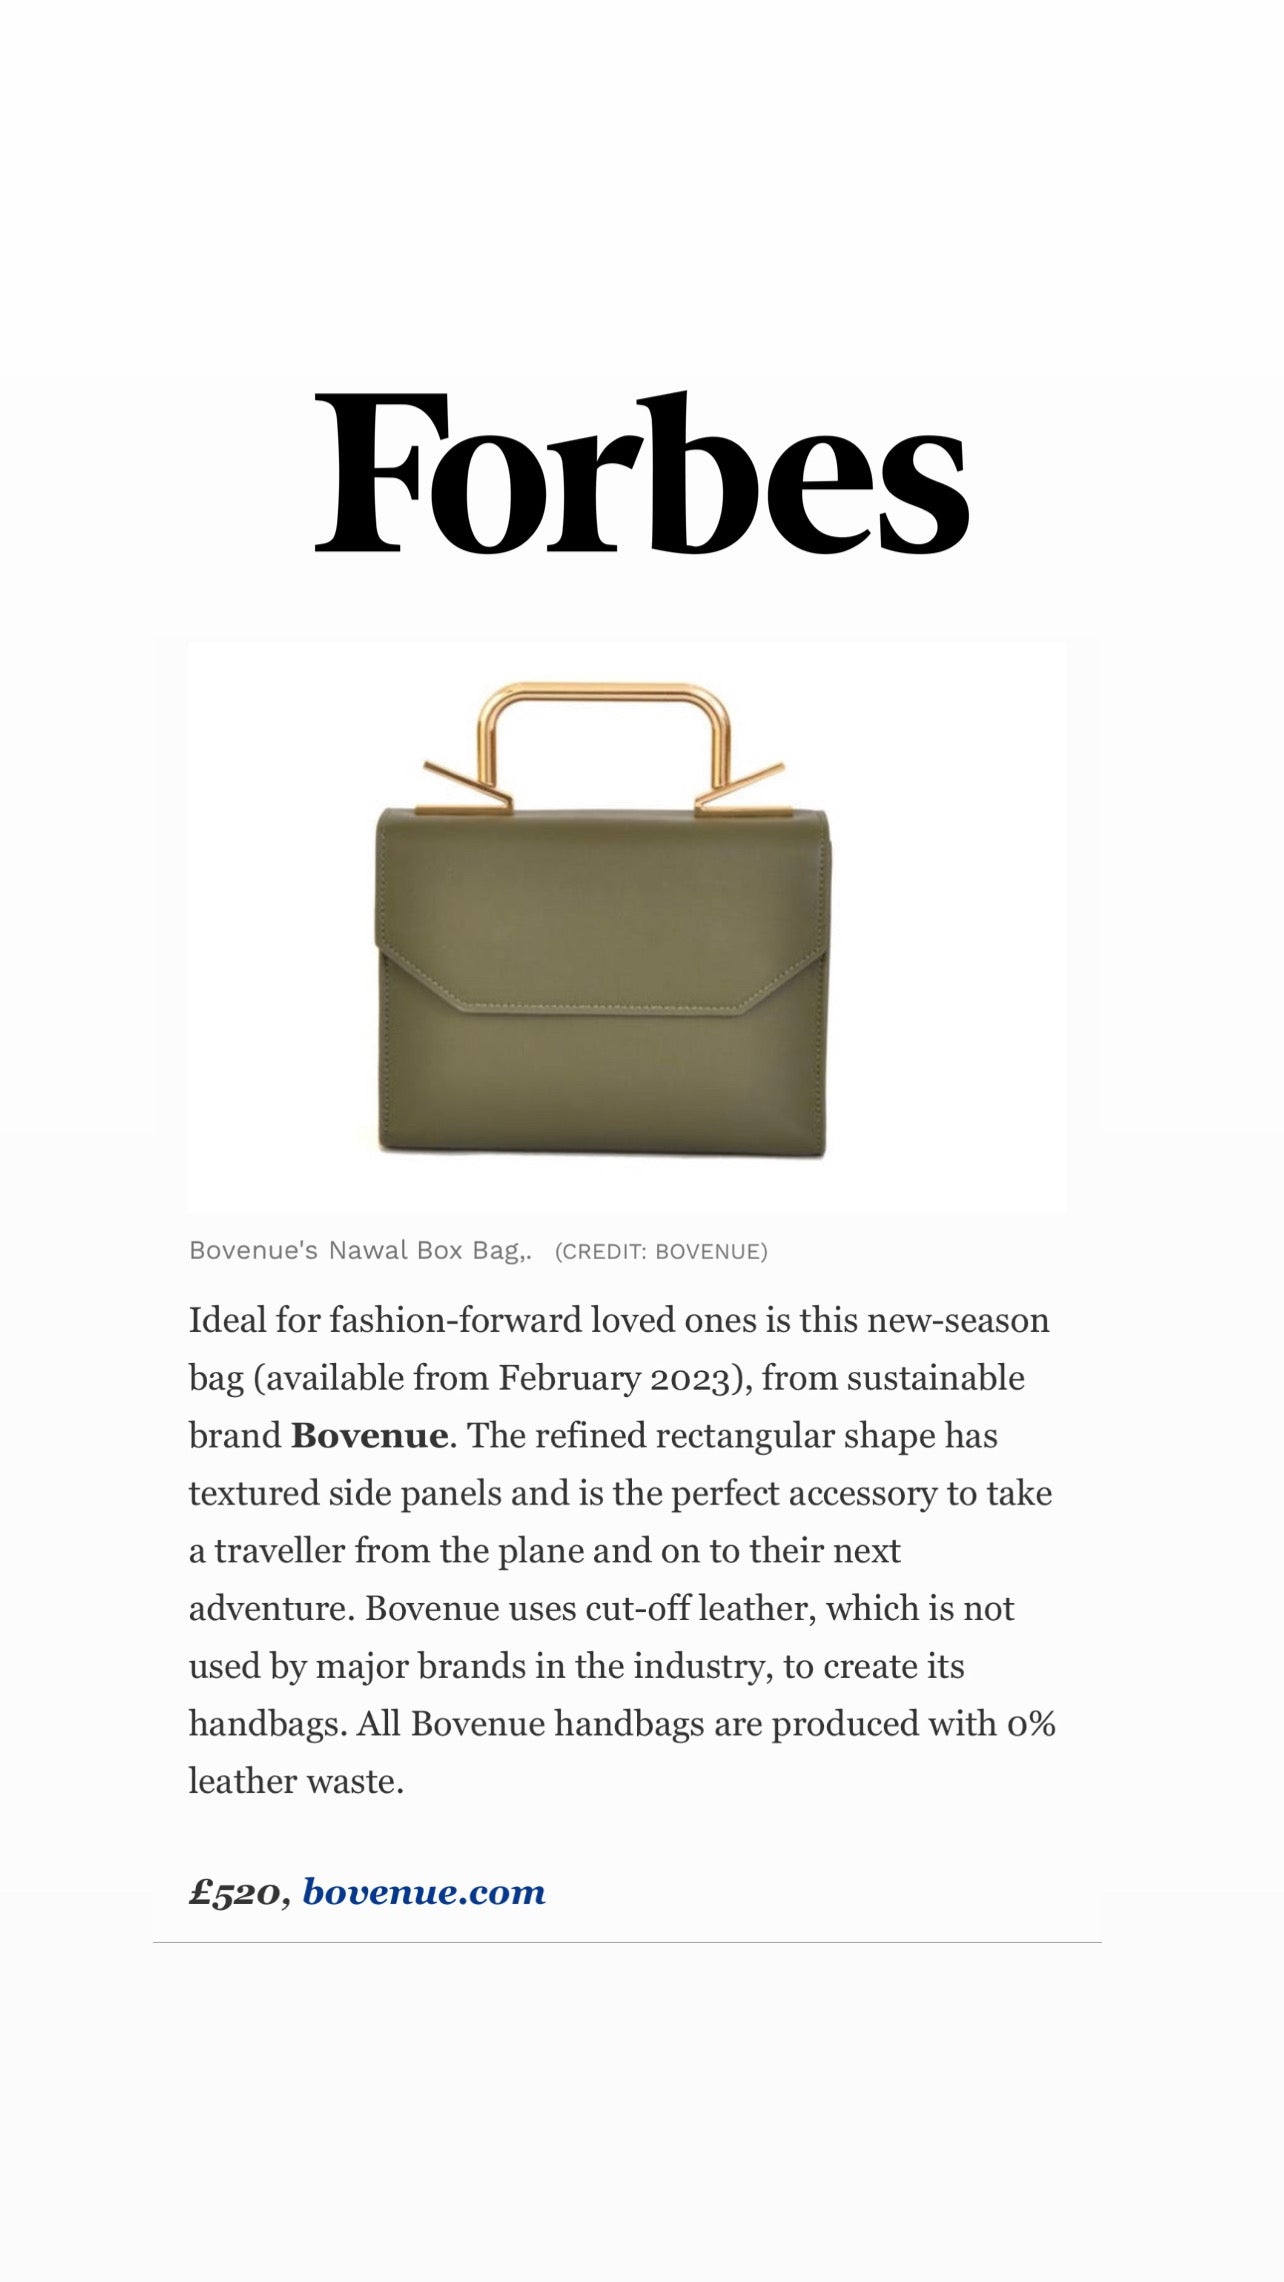 BOVENUE in Forbes on the brand's zero waste!